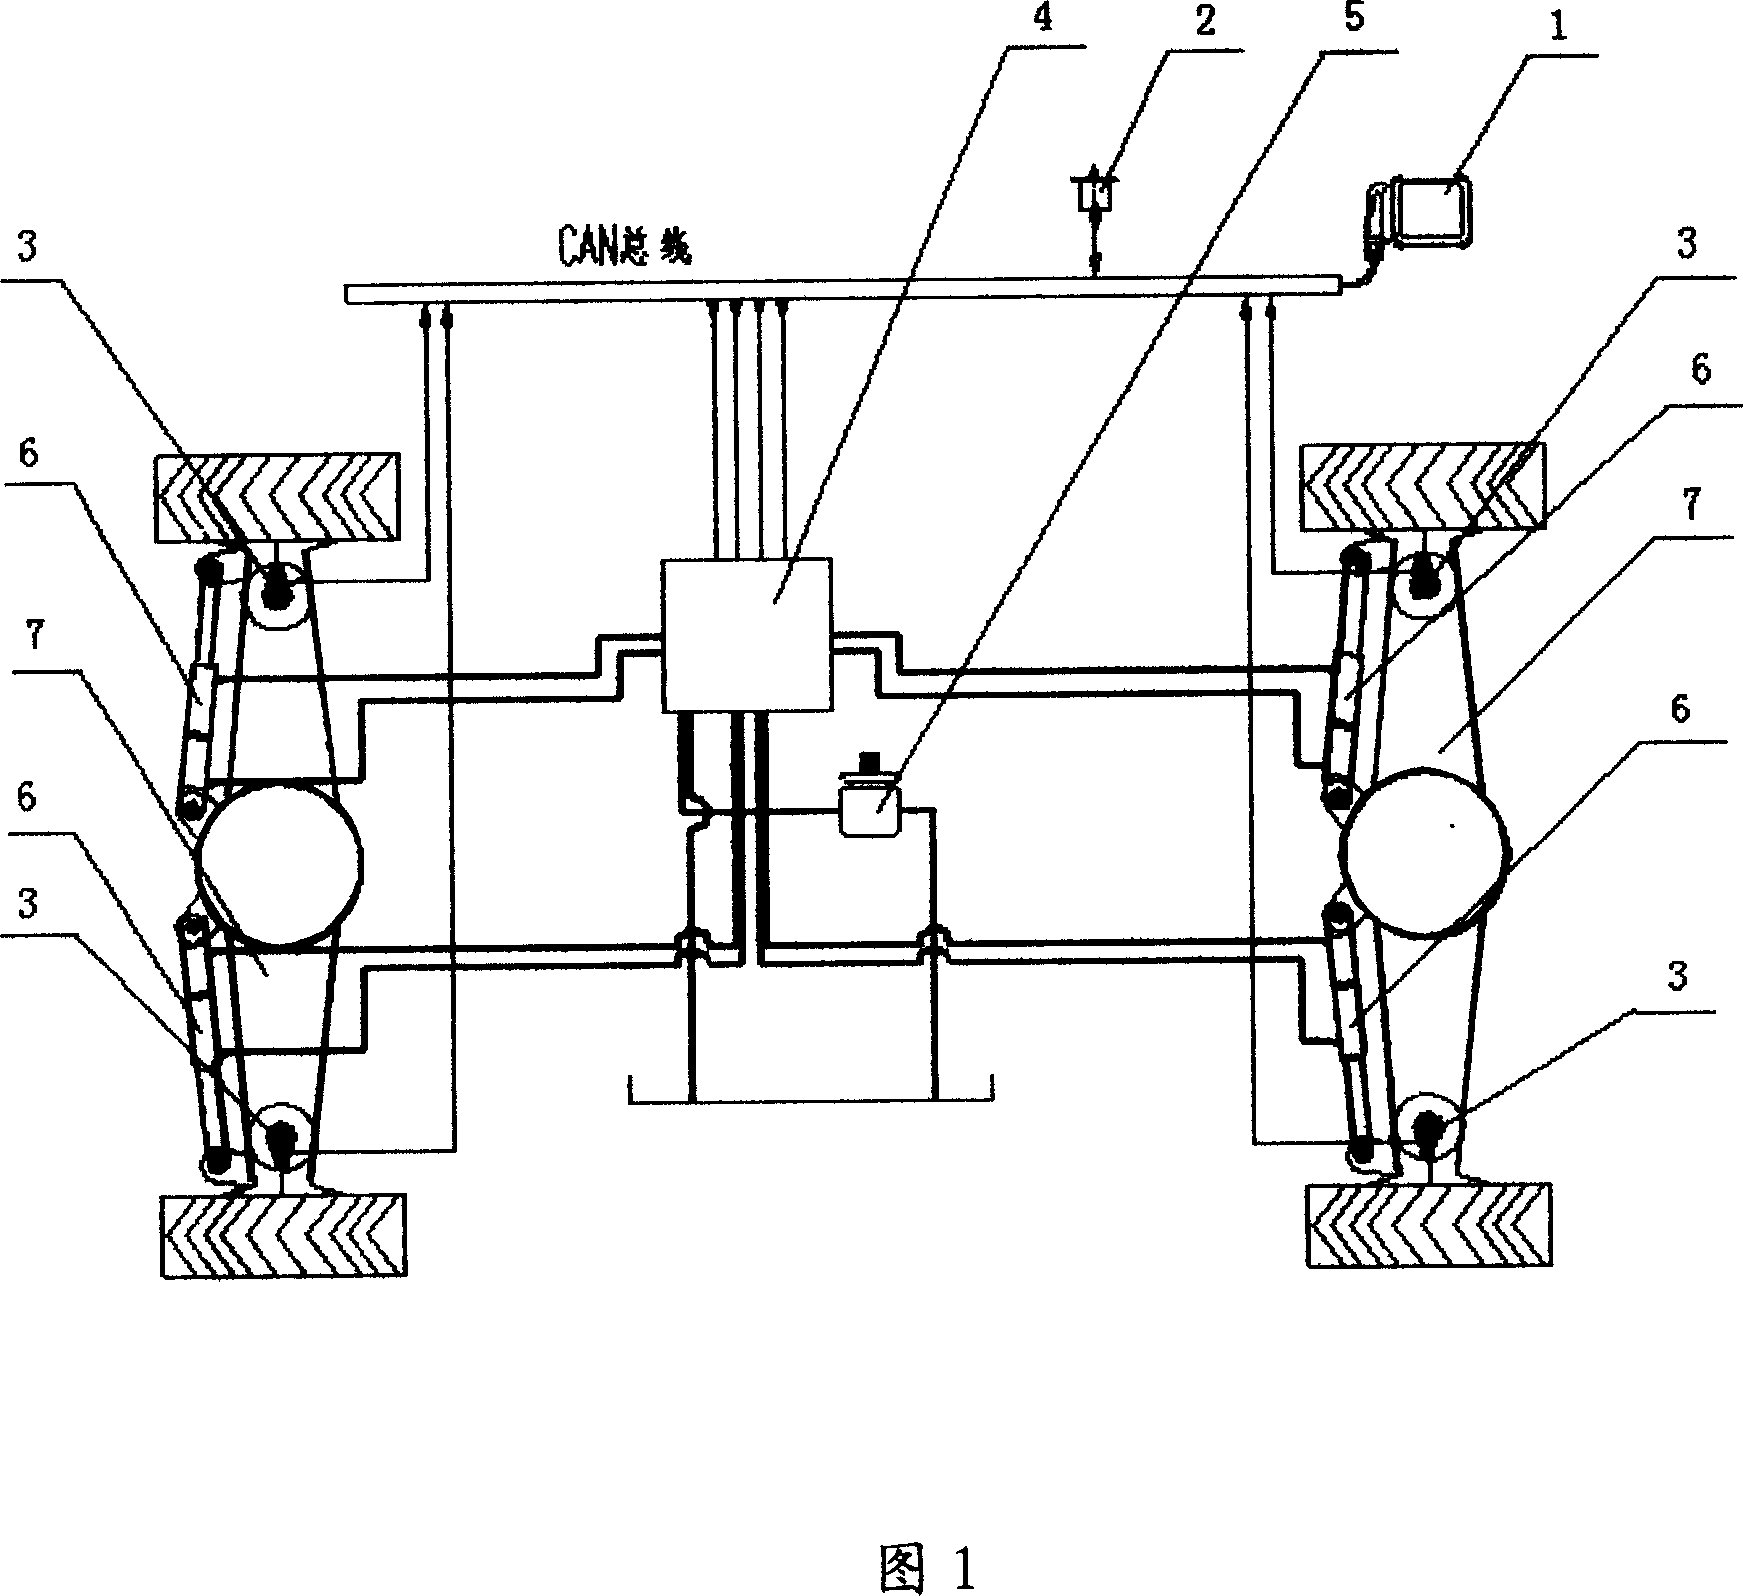 System for controlling multiple car wheels turning accurately